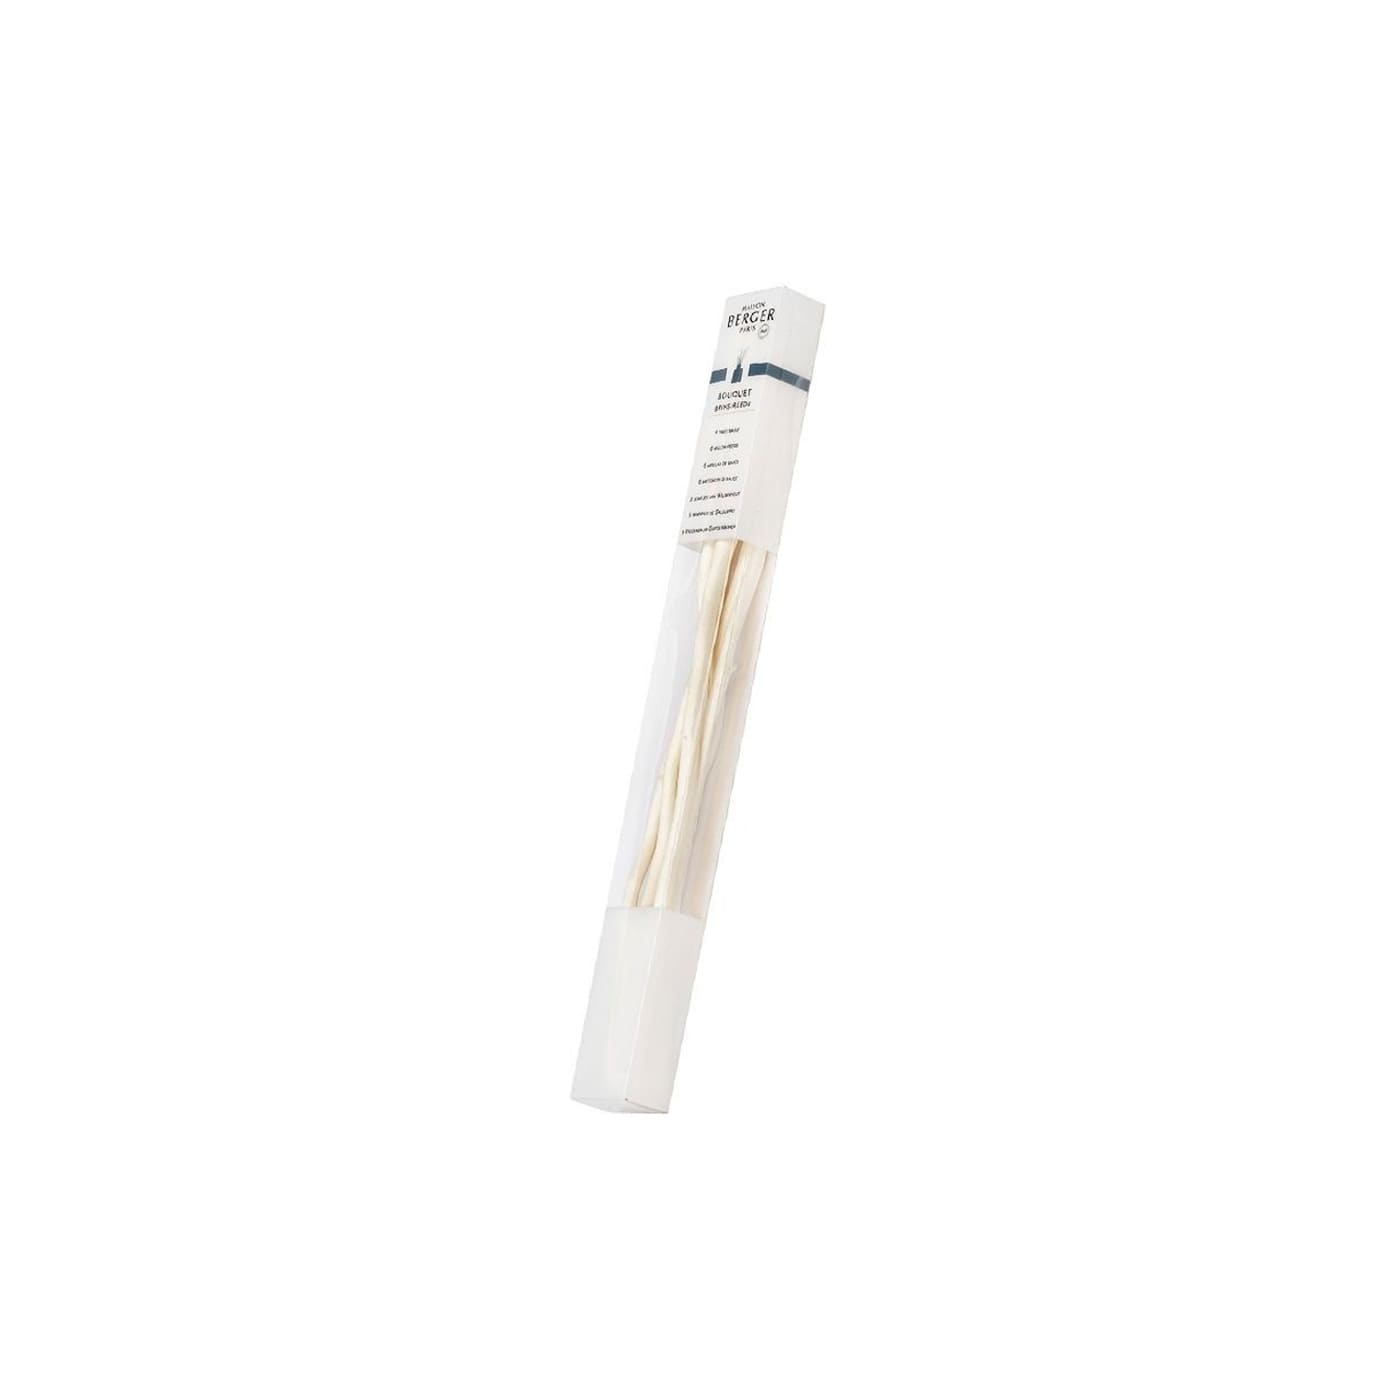 Aroma reeds for diffuser natural white willow sticks Maison Berger Paris